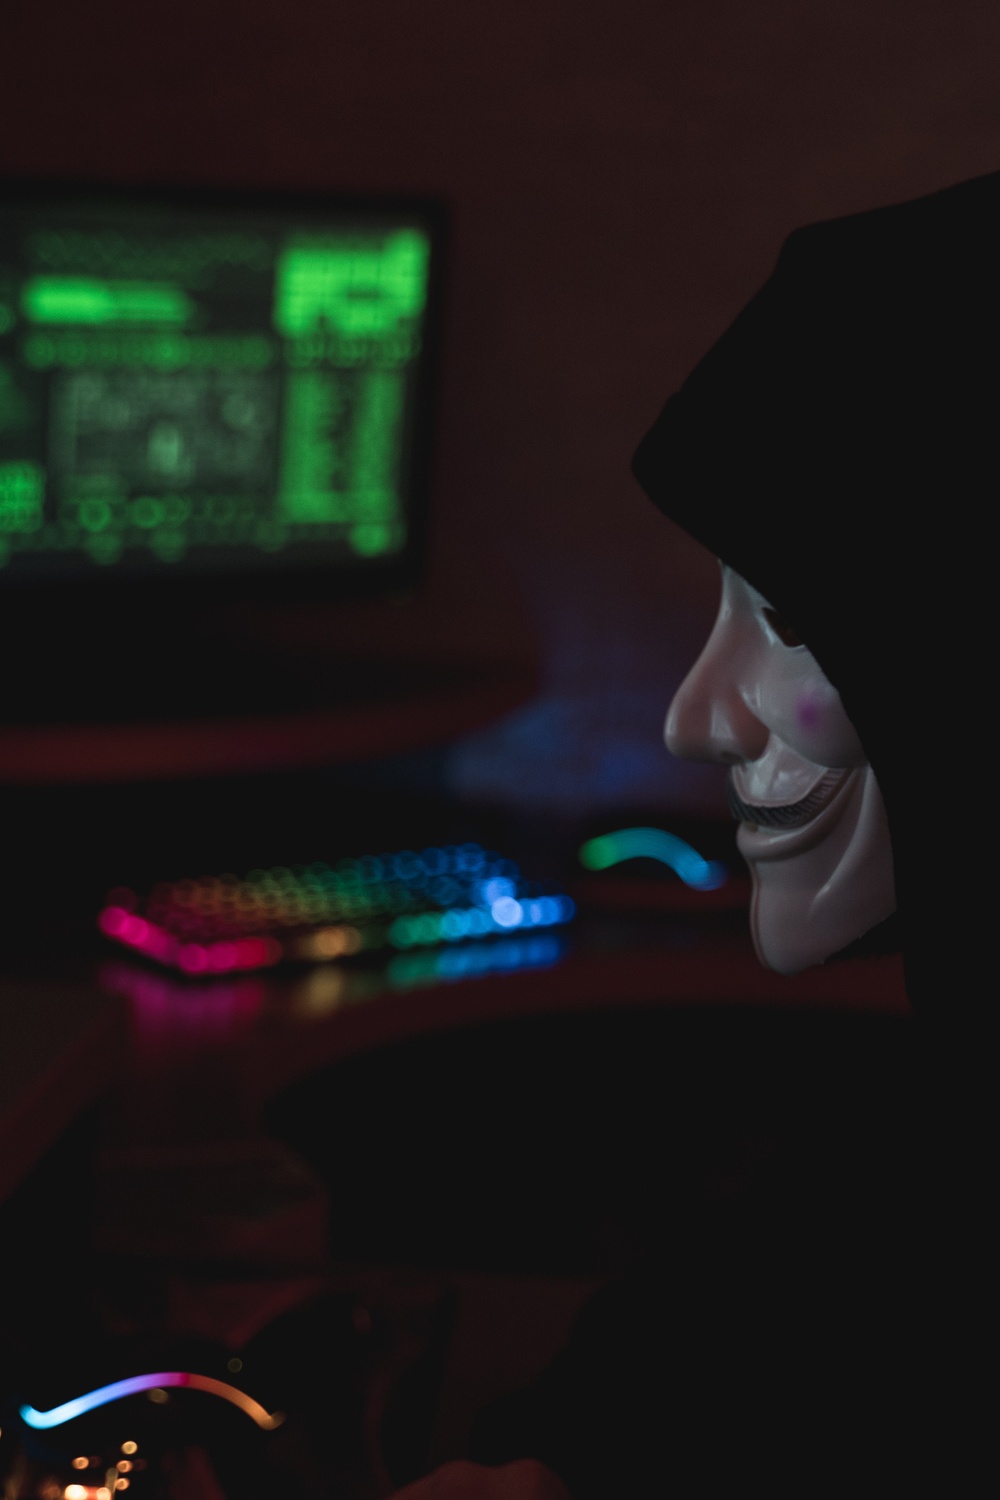 A dark room with a computer screen, green letters on the screen and a hooded figure wearing an Anonymous/Guy Fawkes mask.